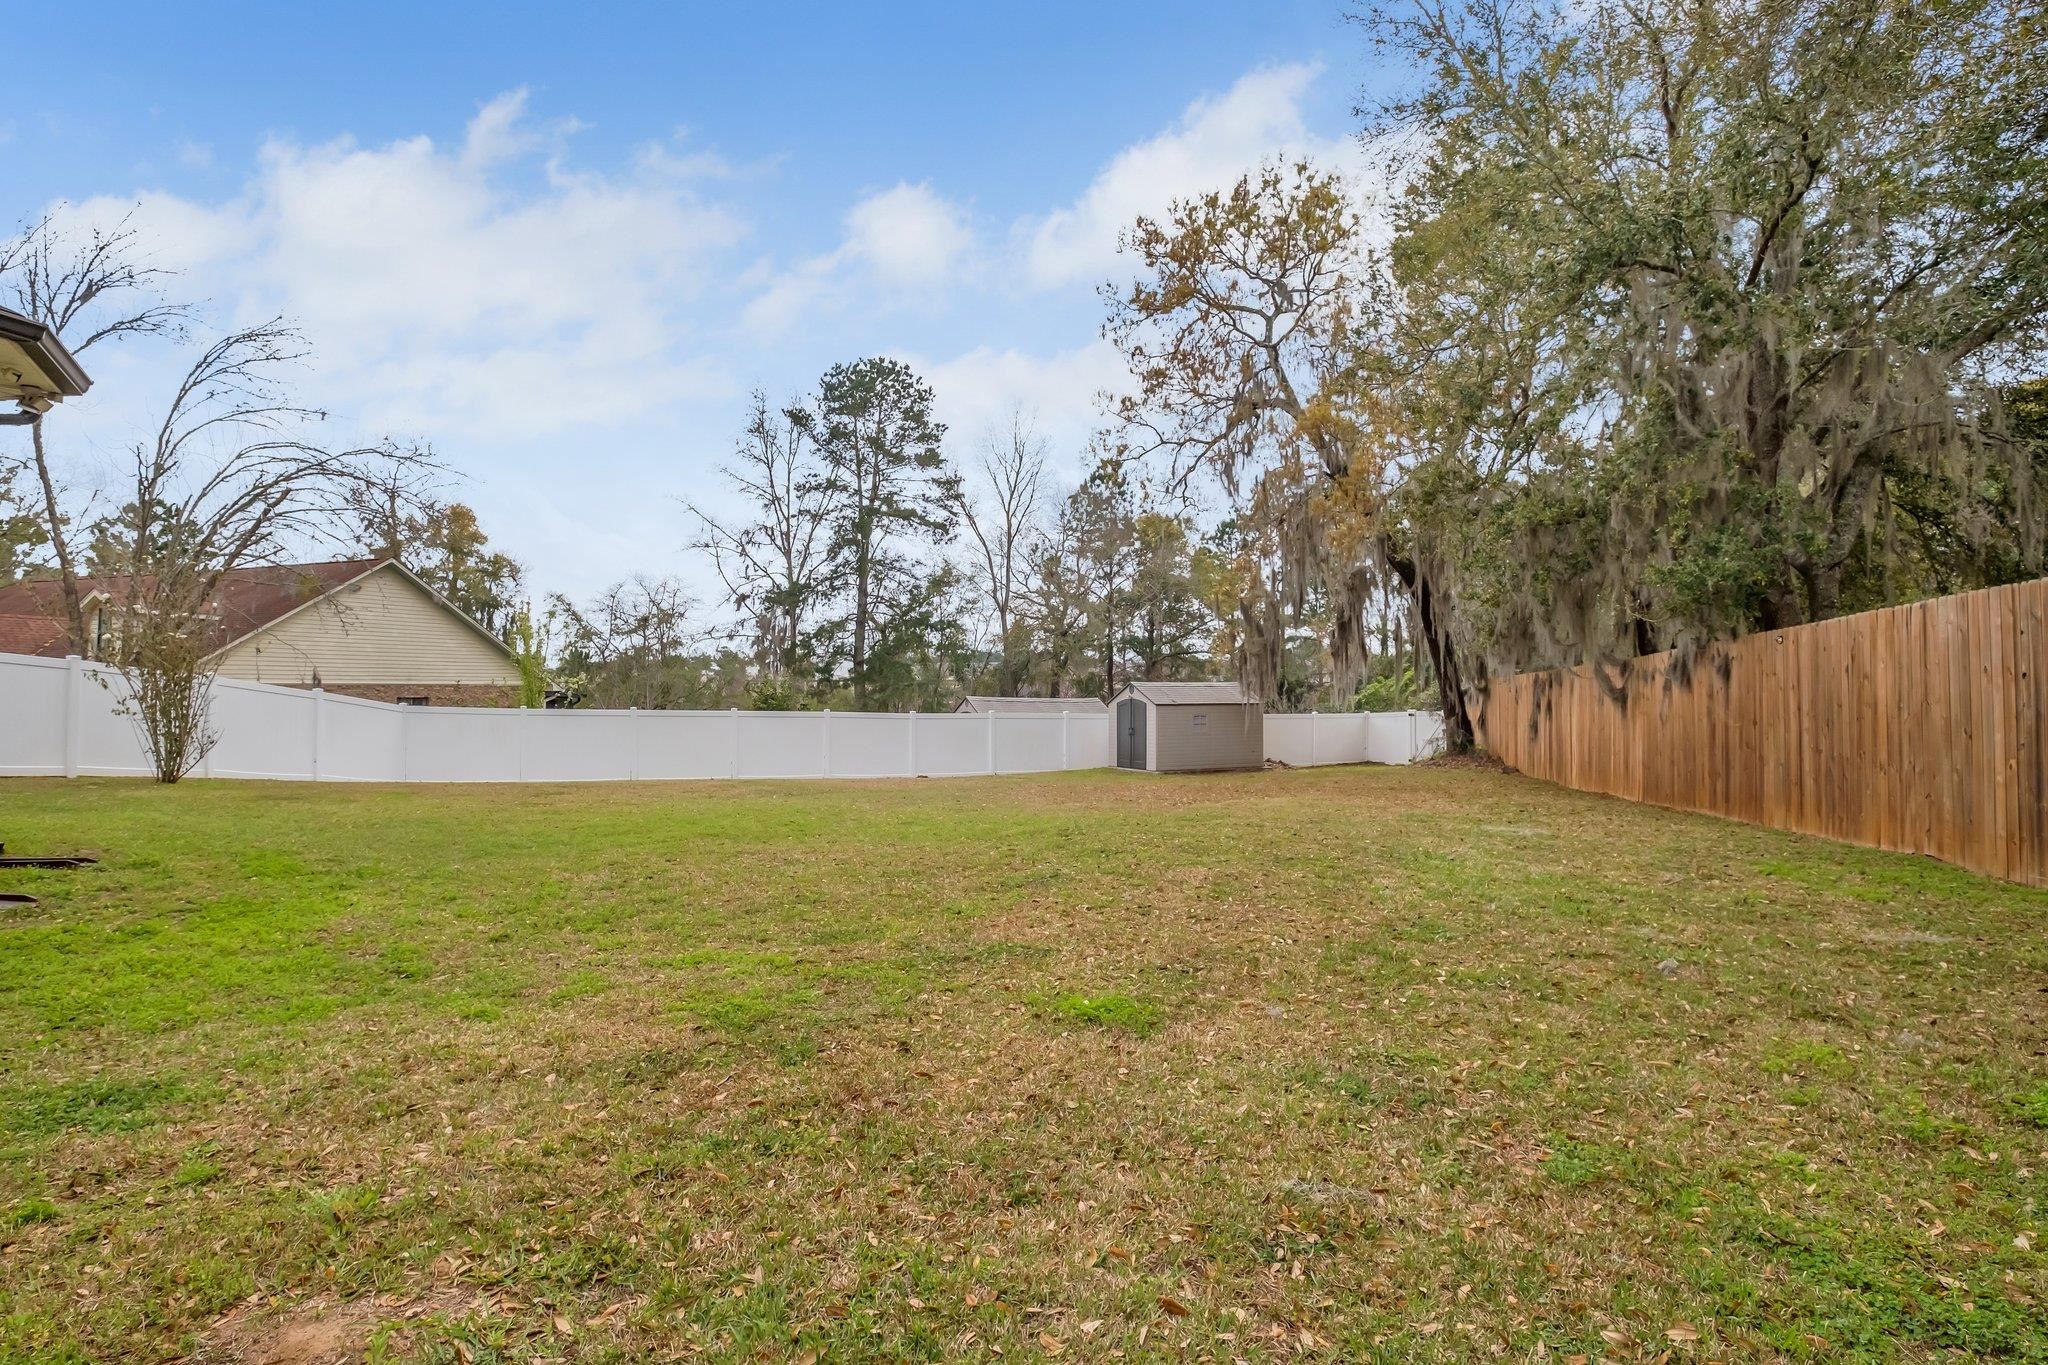 5408 Moores Mill Road,TALLAHASSEE,Florida 32309,3 Bedrooms Bedrooms,2 BathroomsBathrooms,Detached single family,5408 Moores Mill Road,370231